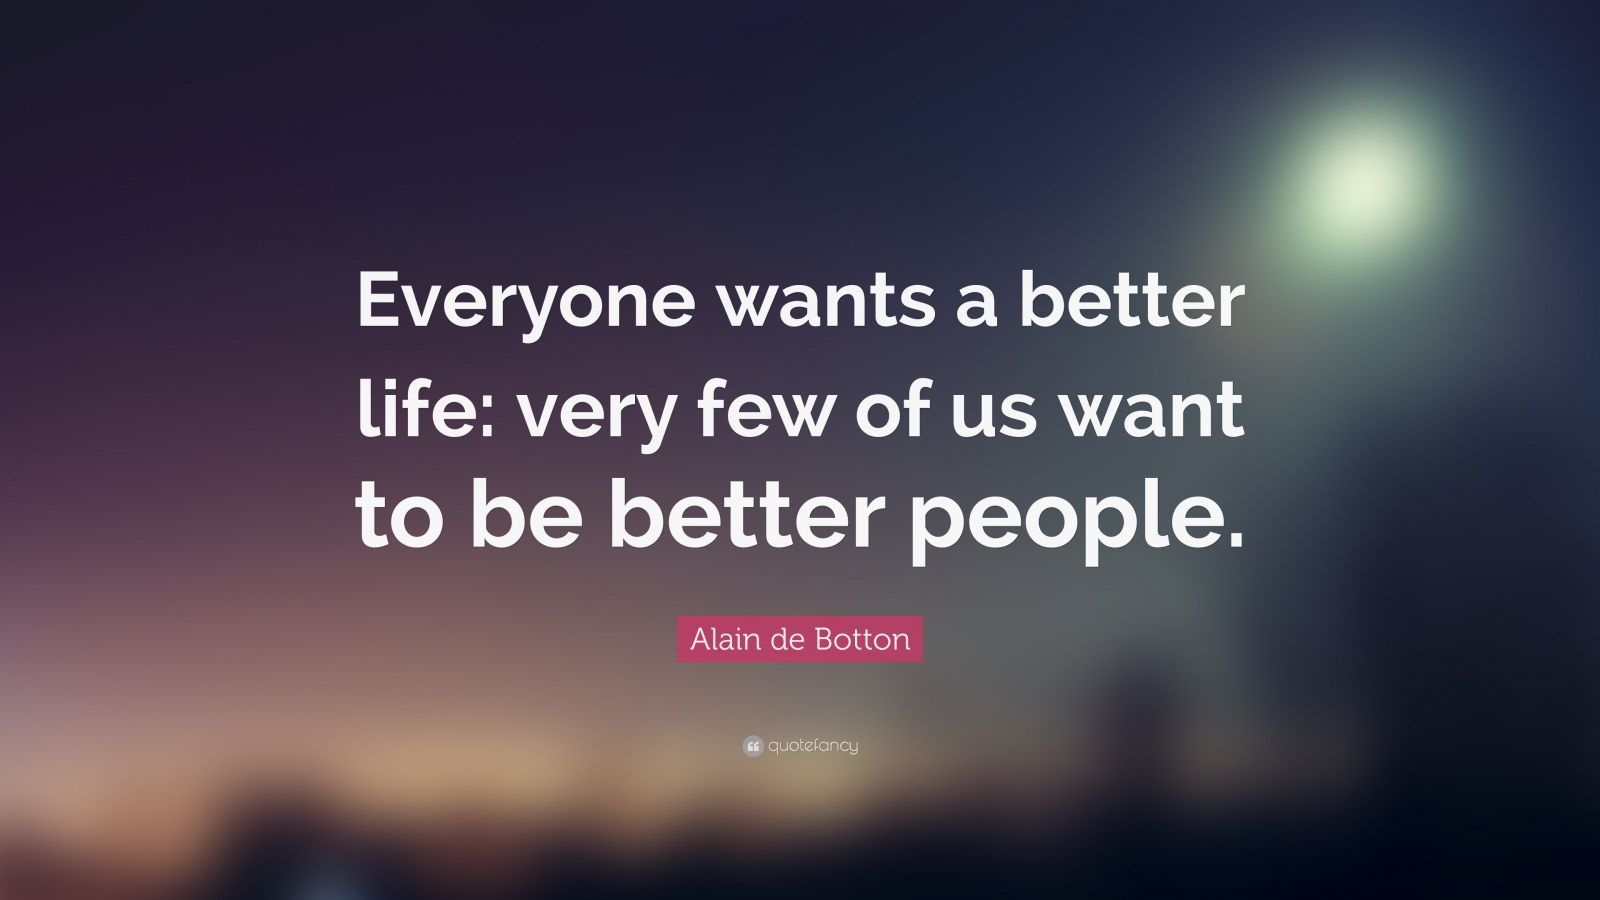 Alain de Botton Quote “Everyone wants a better life very few of us